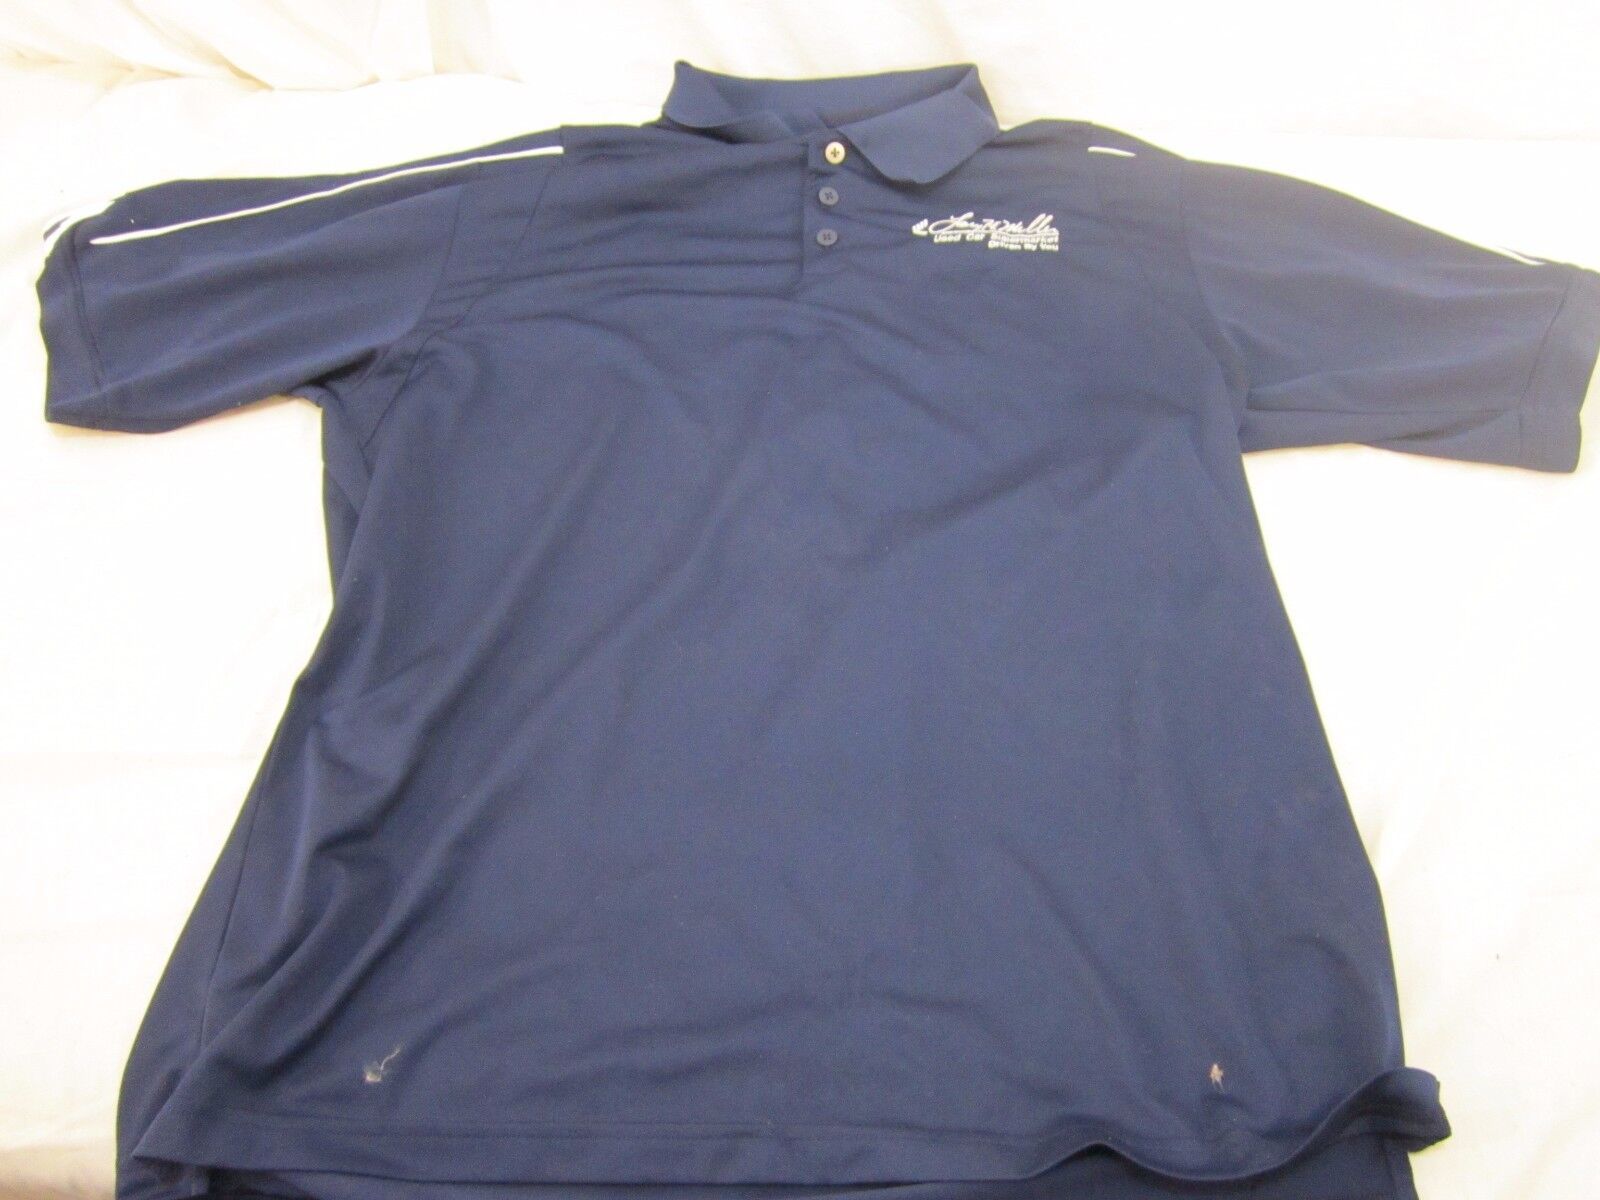 Adidas Golf ClimaLite Polo XL Jay H. Miller Car supermarket used/preowned 110336 - $29.15